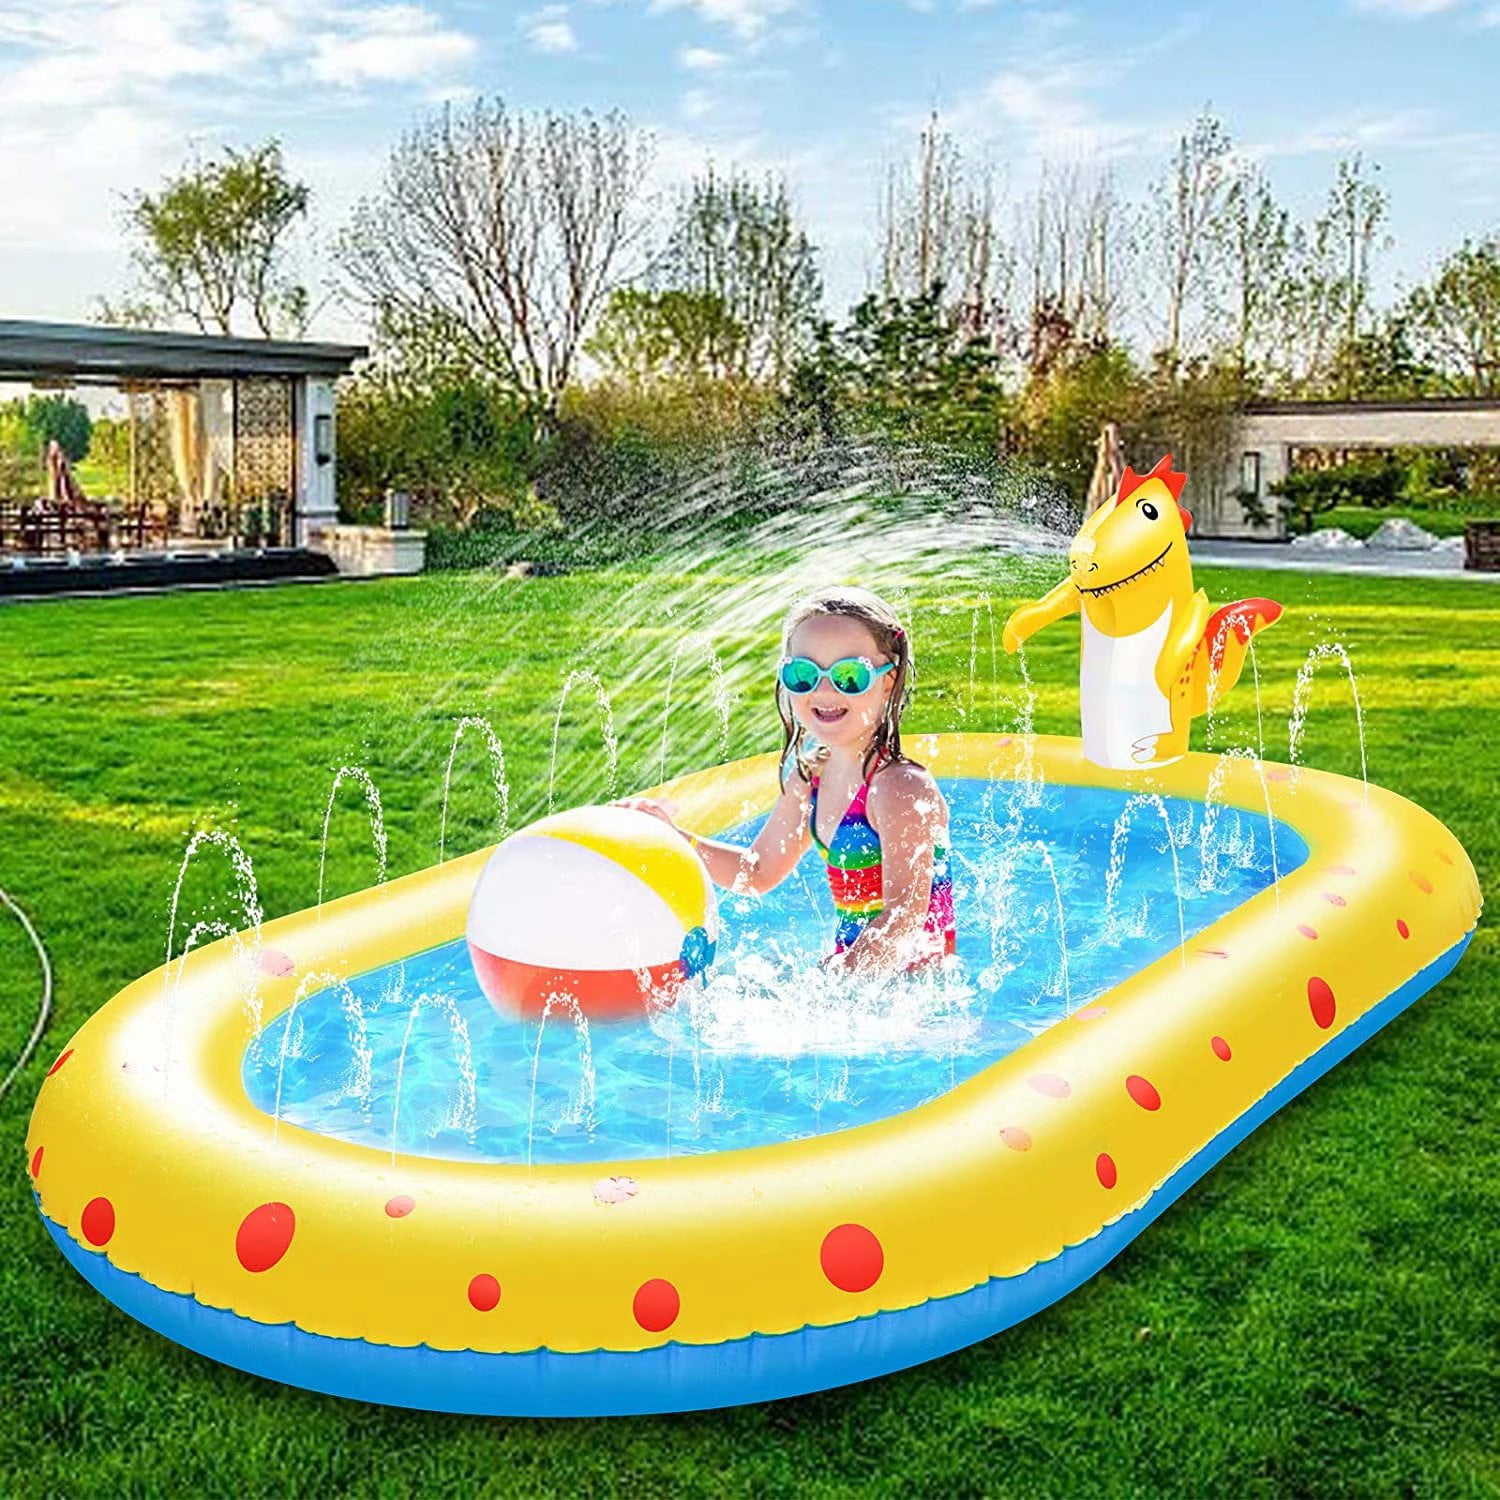 New Kids Inflatable Seal Garden Water Sprinkler Blow up Summer Toy for Kids 